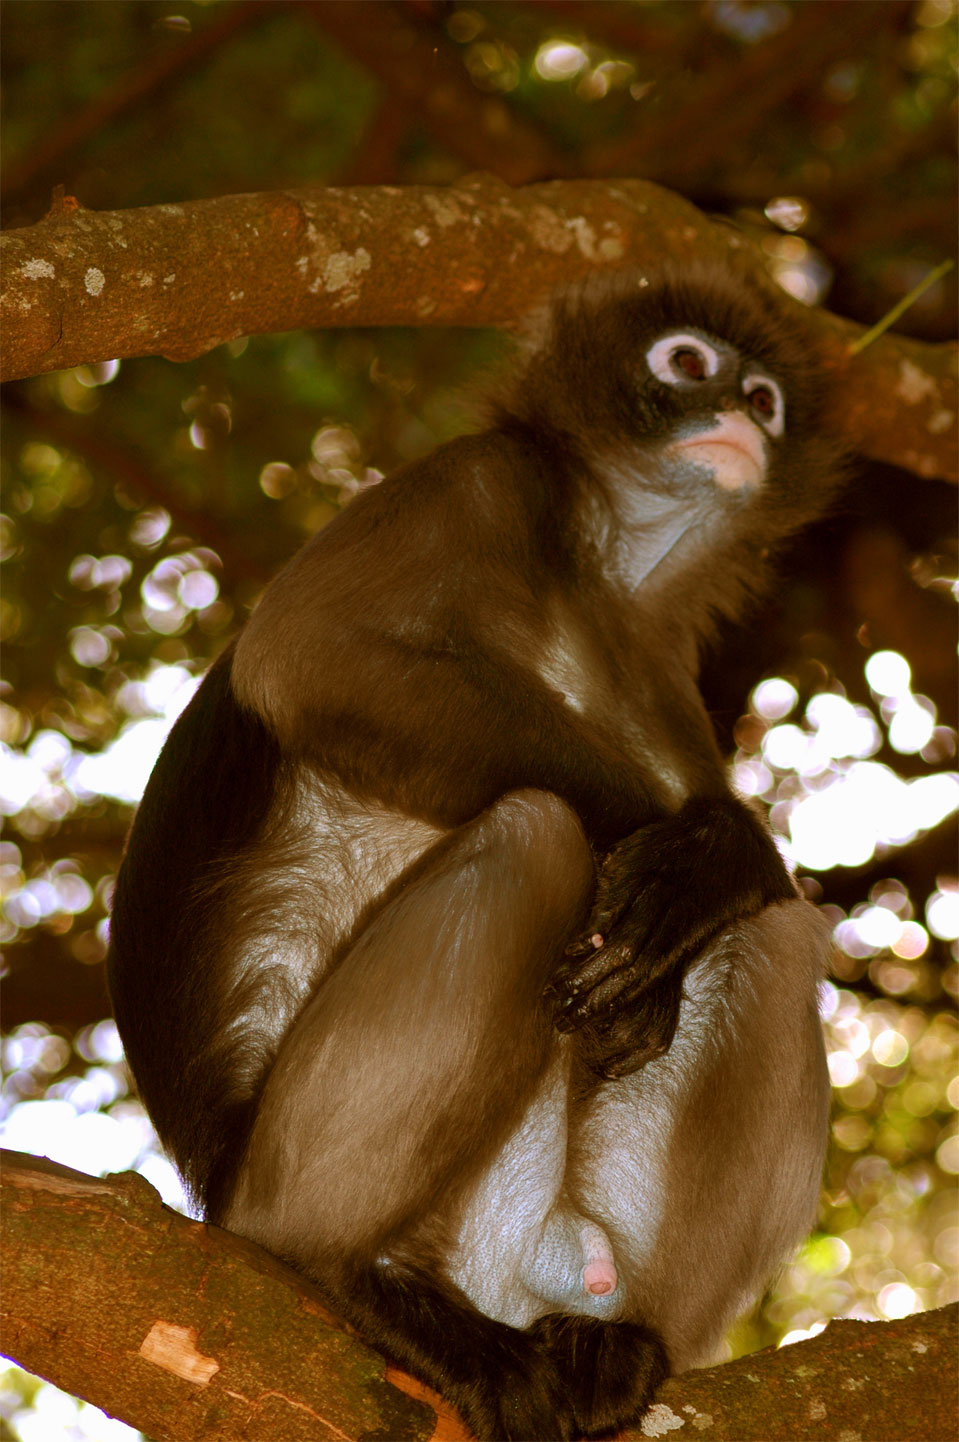 The spectacled langur (Trachypithecus obscurus).